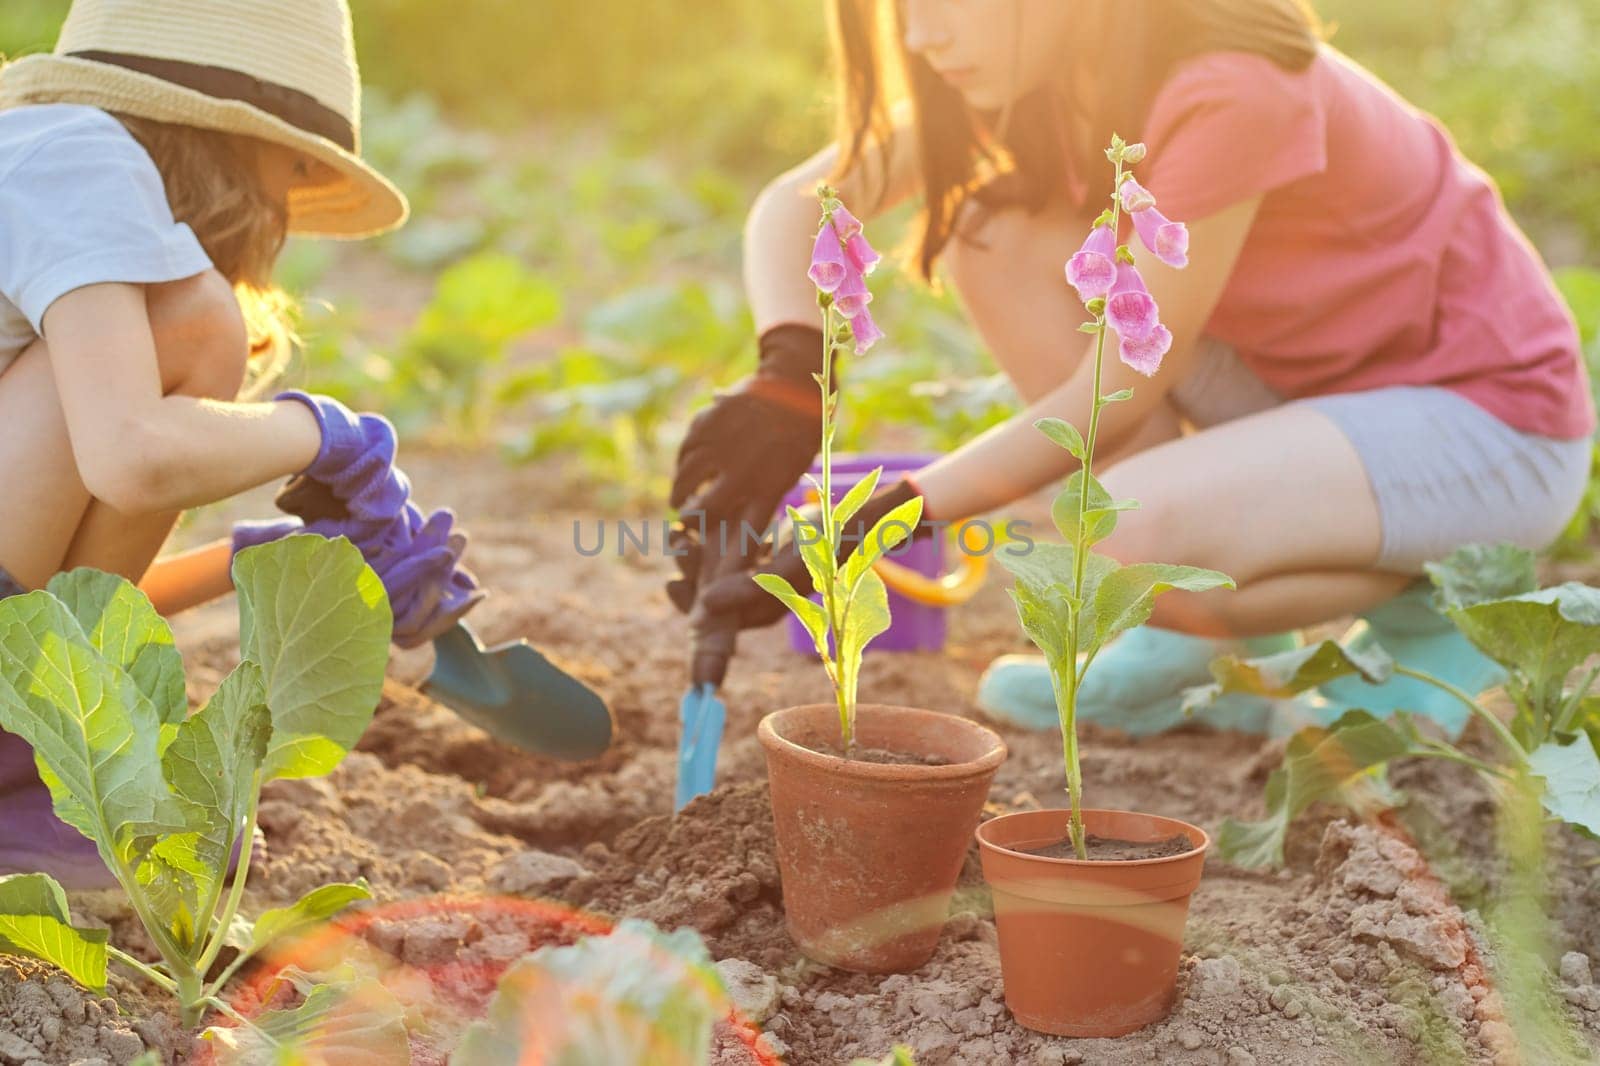 Flowering plant in pot, children two girls with garden shovels bucket planting flower in ground out of focus